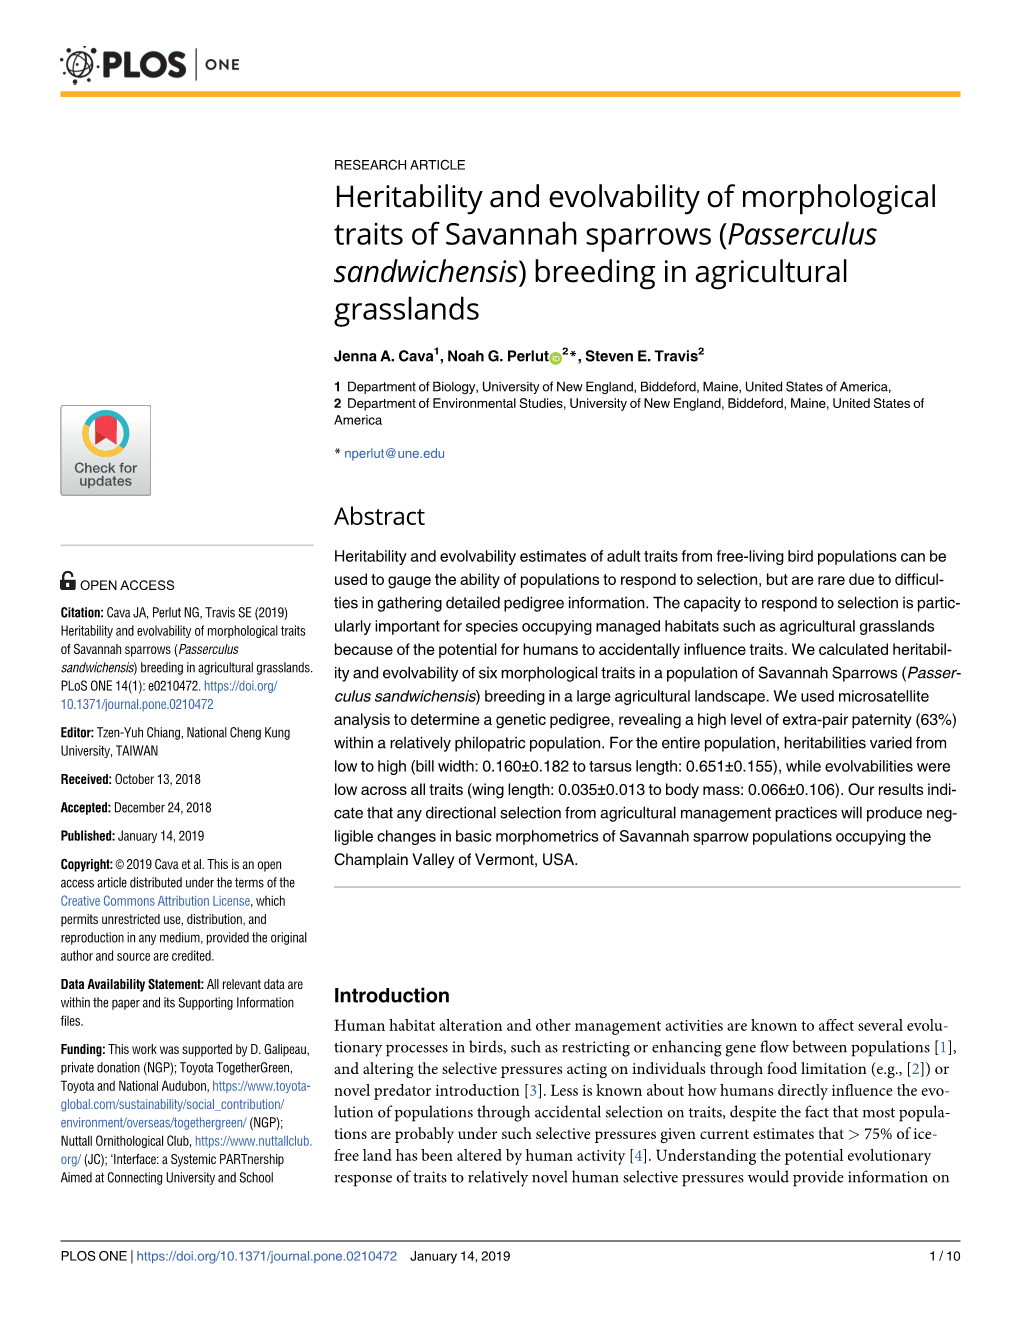 Heritability and Evolvability of Morphological Traits of Savannah Sparrows (Passerculus Sandwichensis) Breeding in Agricultural Grasslands